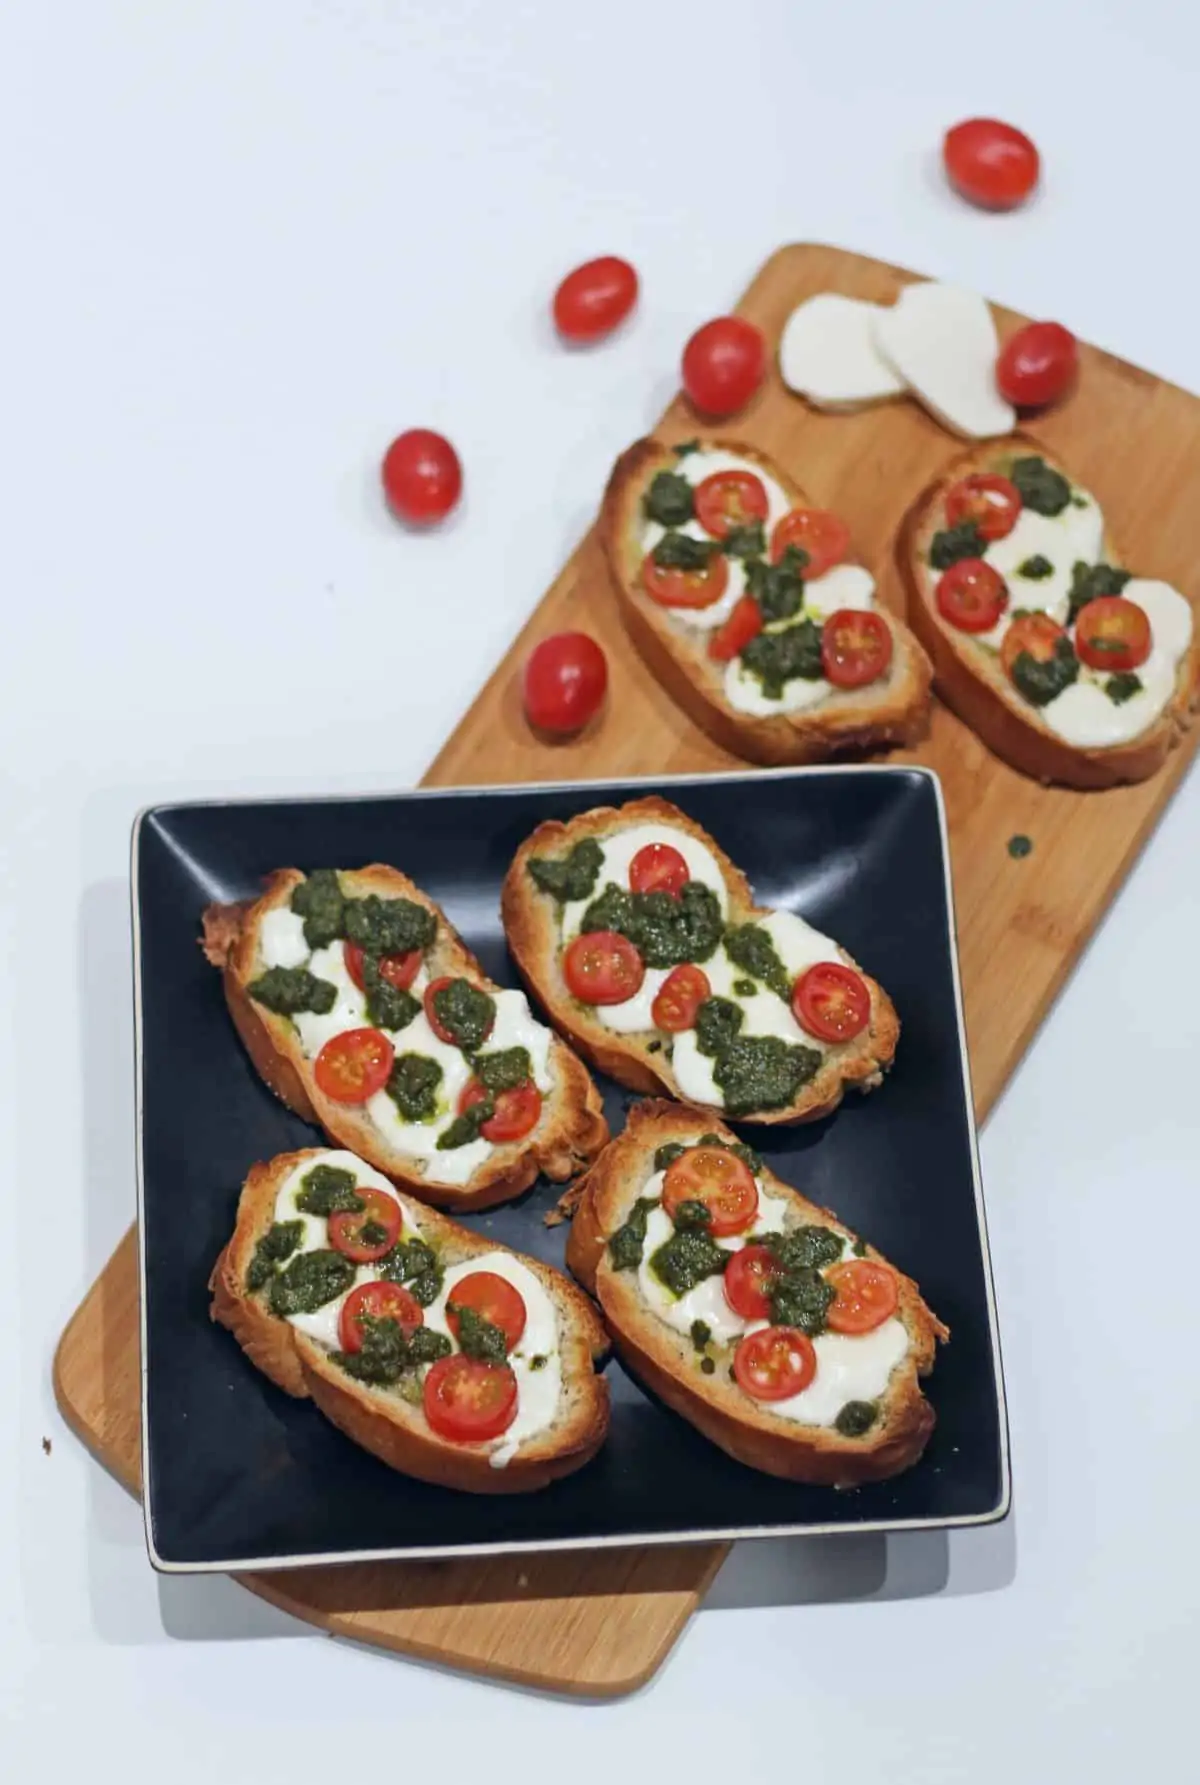 Homemade crostini with cherry tomatoes, mozzarella cheese and basil pesto on a black plate